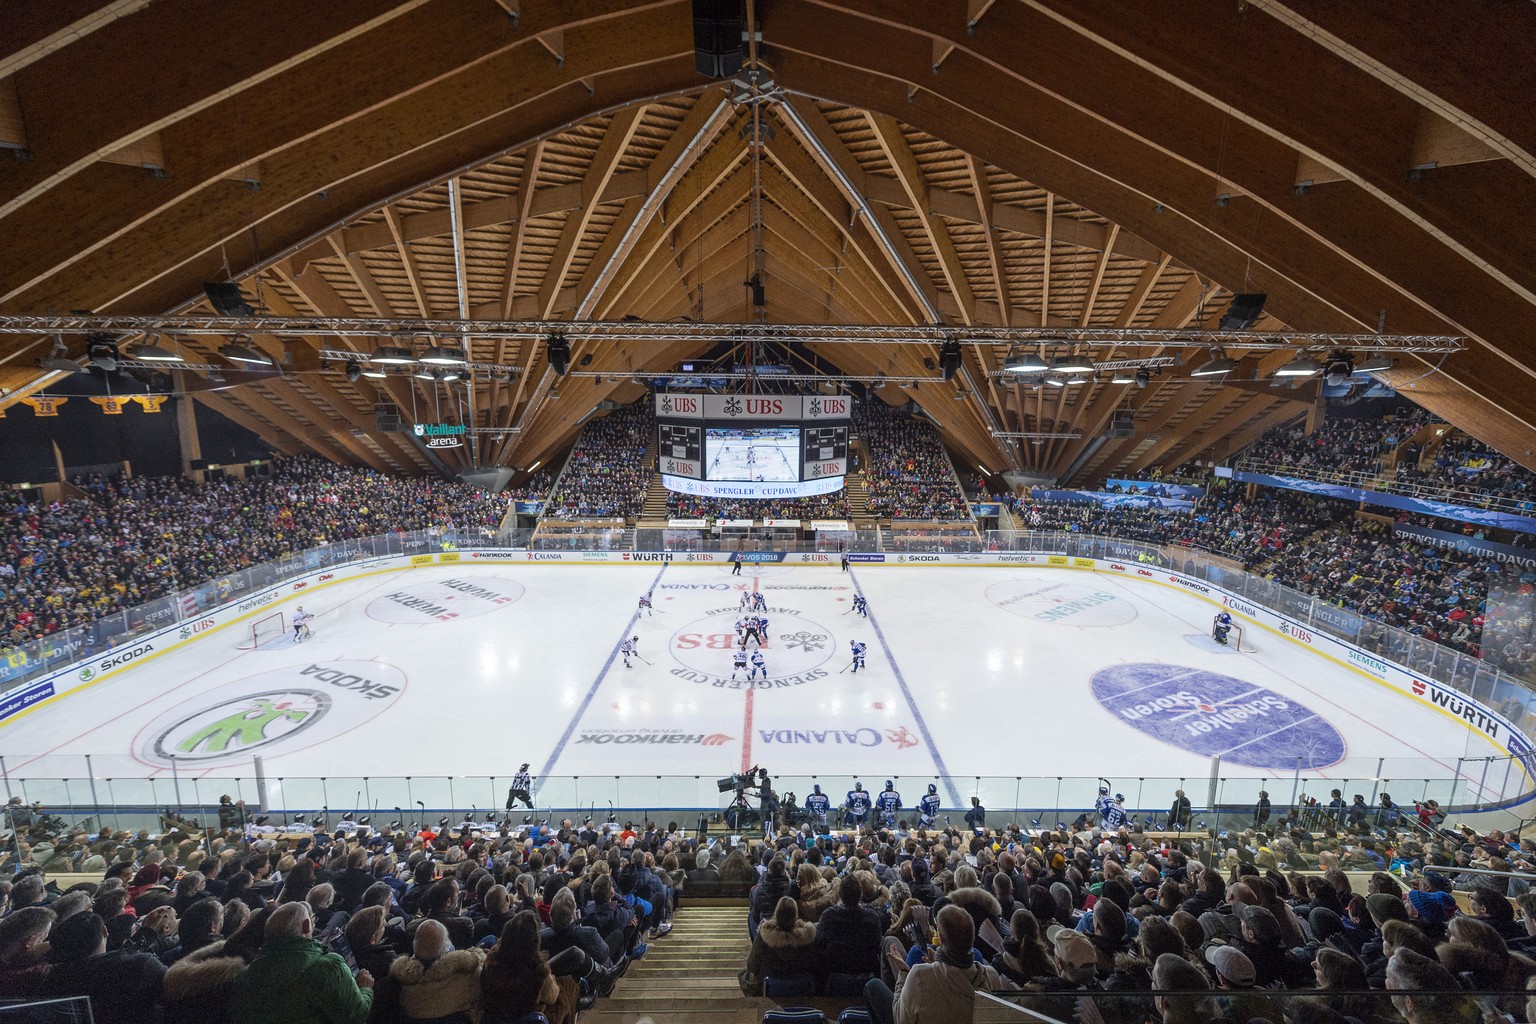 General view during the game between HC Davos and Team Canada, at the 92th Spengler Cup ice hockey tournament in Davos, Switzerland, Wednesday, December 26, 2018. (KEYSTONE/Melanie Duchene).